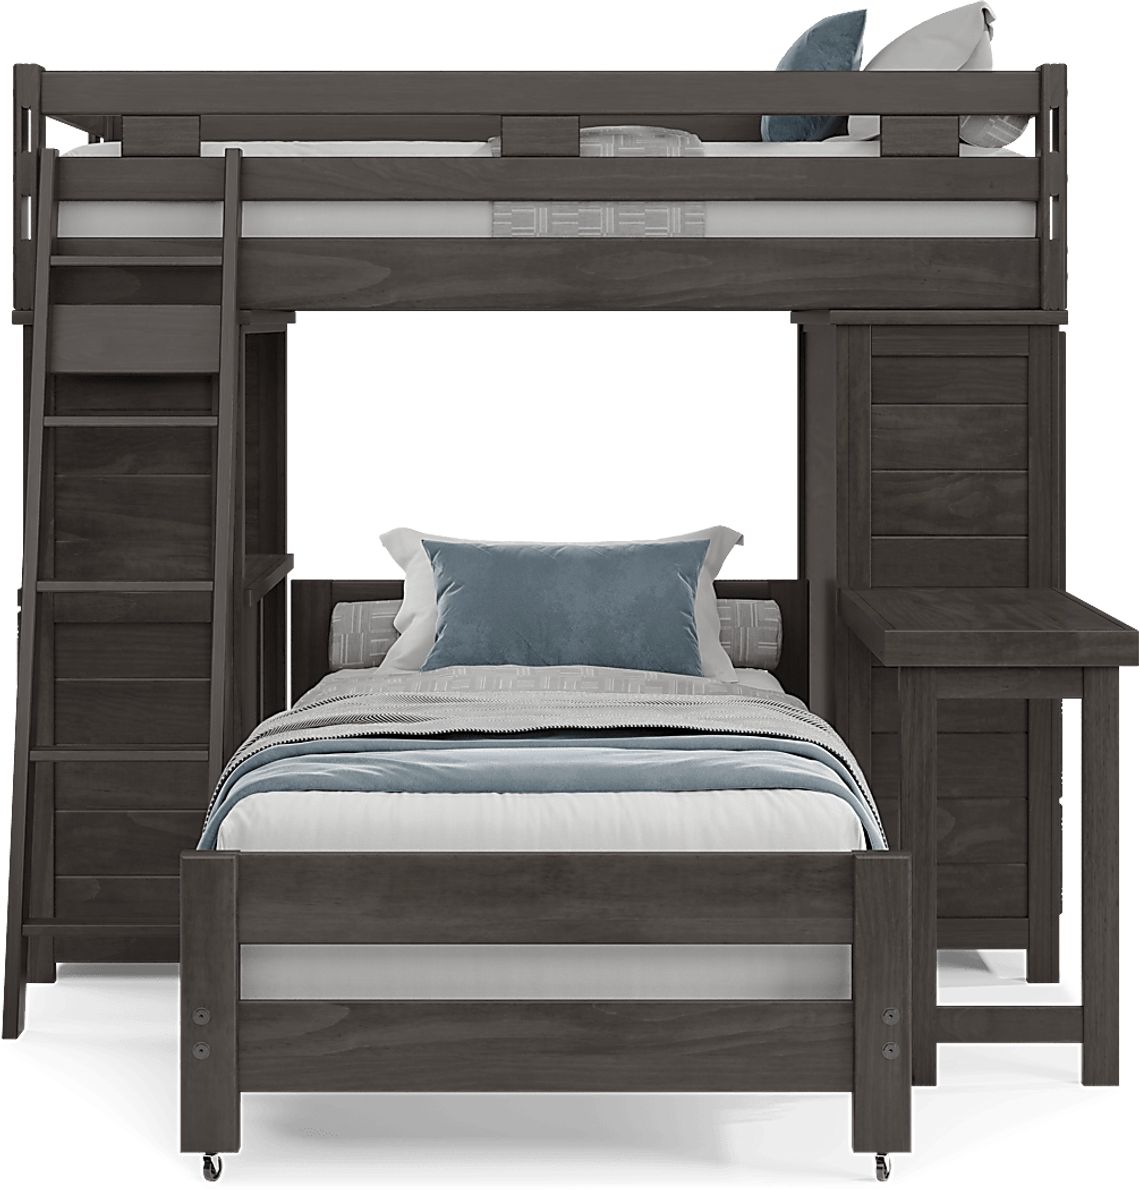 Kids Creekside 2.0 Charcoal Twin/Twin Loft with Loft Chest, Desk and Desk Attachment